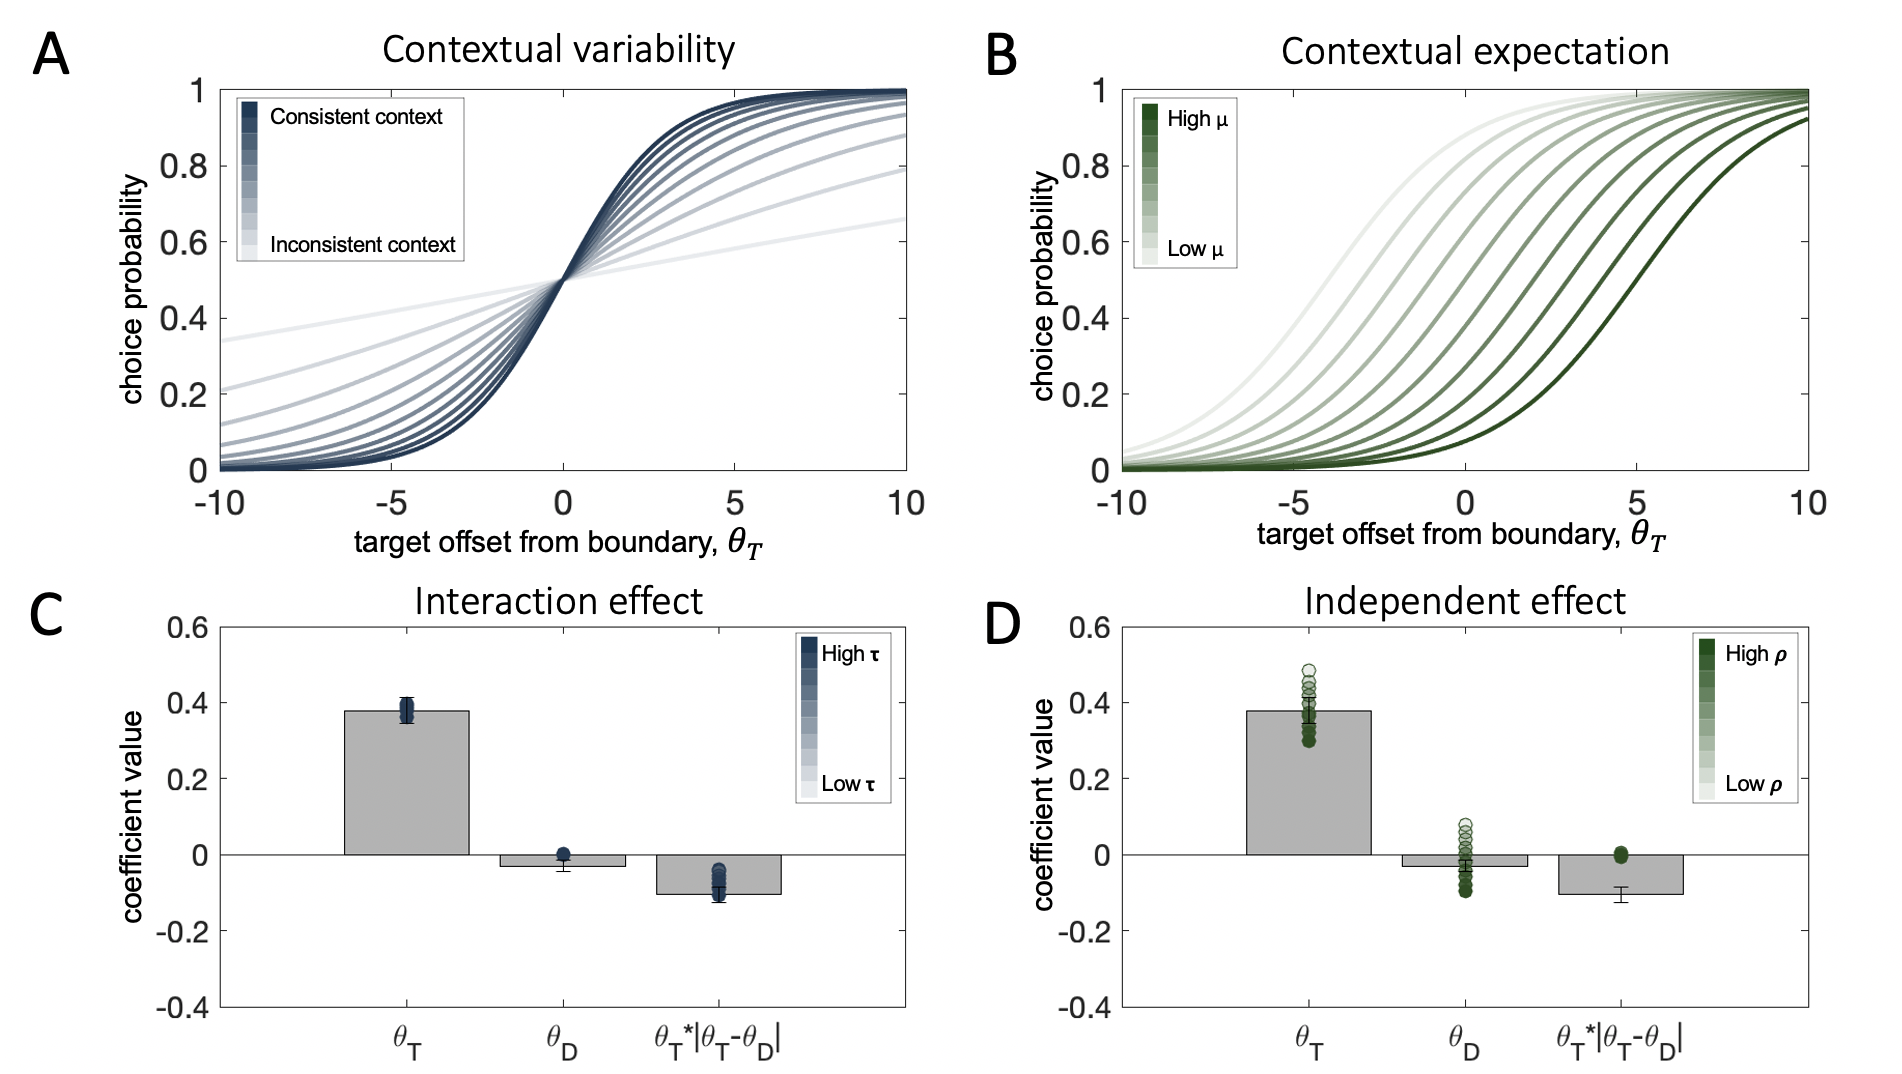 Model simulations of the effects of context on the transducer function translating decision inputs into choice probabilities (top) and on the distractor effects in choice behavior (bottom). $\textbf{A:}$ The consistency of context changes the slope of the transducer. Lower contextual variability leads to steeper slope (darker blue curves) and vice versa for high variability (lighter blue curves). $\textbf{B:}$ The contextual expectation changes the location of the inflection point of the transducer. A high contextual average leads to a transducer shifted rightwards along the x-axis (darker green curves) and vice versa for low contextual average. $\textbf{C:}$ Contextual variability leads to an interaction effect of the distractor (target-distractor consistency). Bars correspond to coefficients from a regression on human choices from Experiment 1, filled circles correspond to an analogous regression on model simulations where we varied parametrically the value of $\tau$, while keeping $\rho$ and $r$ constant. The higher the value of the multiplicative free parameter $\tau$, the stronger the consistency effect (darker circles). $\textbf{D:}$ The contextual expectation leads to an independent effect of the distractor. Bars correspond to coefficients from a regression on human choices from Experiment 1, filled circles correspond to an analogous regression on model simulations where we varied parametrically the value of $\rho$, while keeping $\tau$ and $r$ constant. The higher the value of the multiplicative free parameter $\rho$, the stronger the repulsion from the distractor (darker circles). Note that manipulations to $\rho$ do not lead to an interaction effect (overlapping circles on last bar).